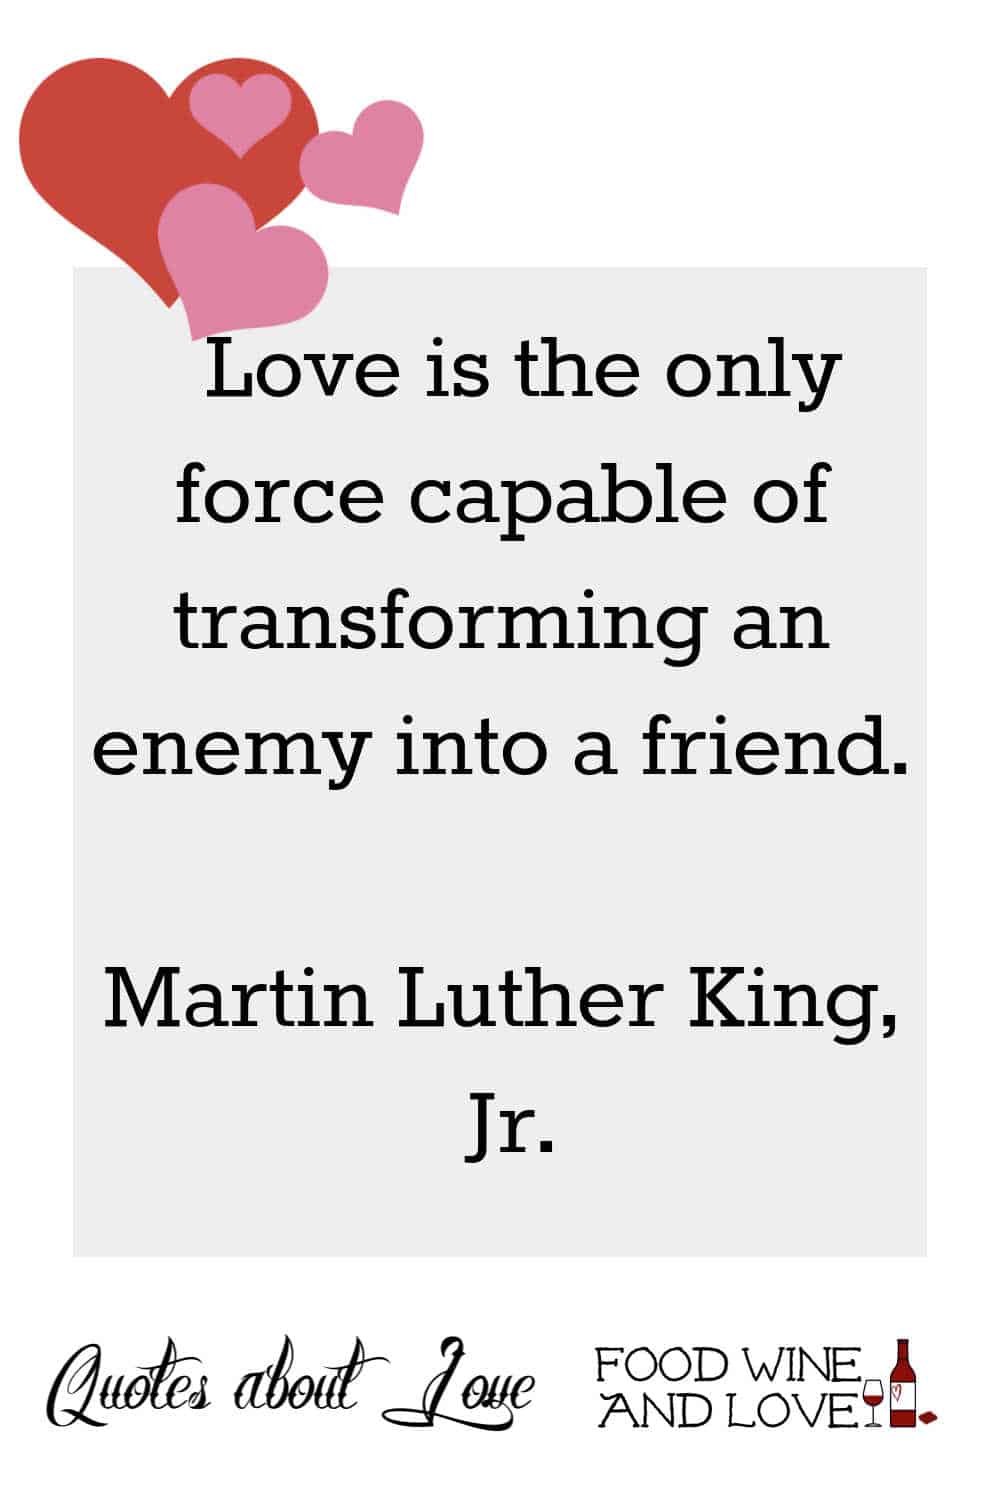  Love is the only force capable of transforming an enemy into a friend.  Martin Luther King, Jr.